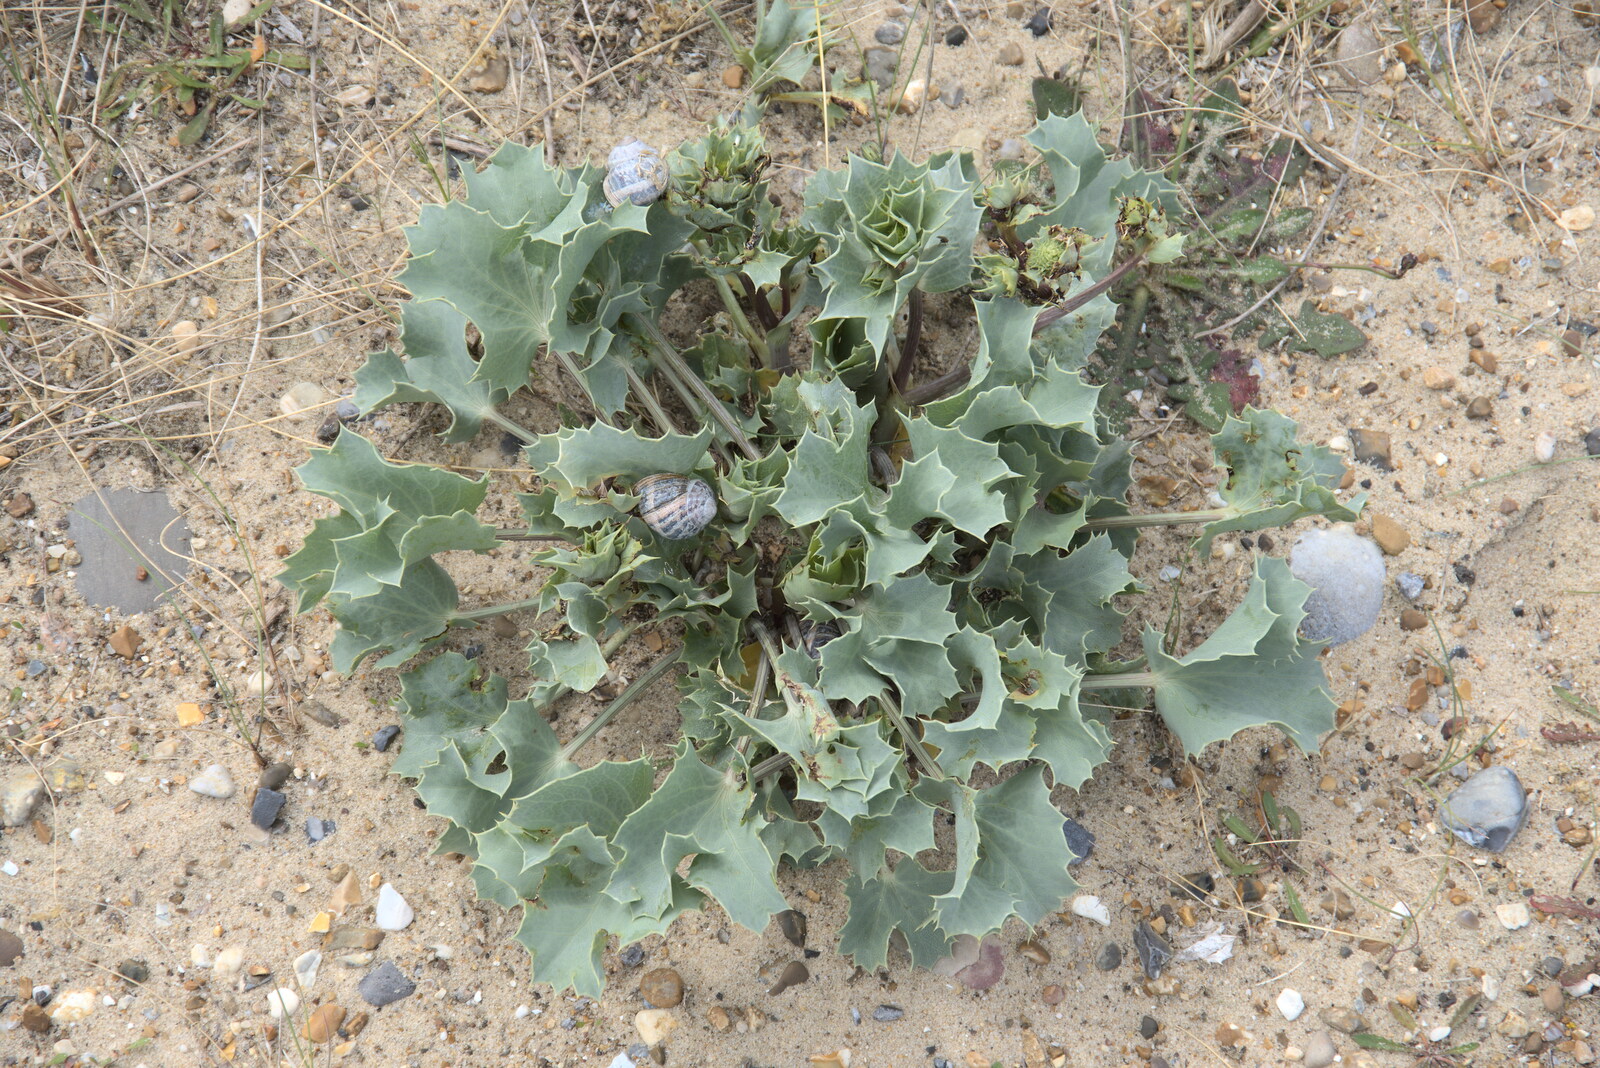 A bit of sea holly, with added snails from Faded Seaside Glamour: A Weekend in Great Yarmouth, Norfolk - 29th May 2022